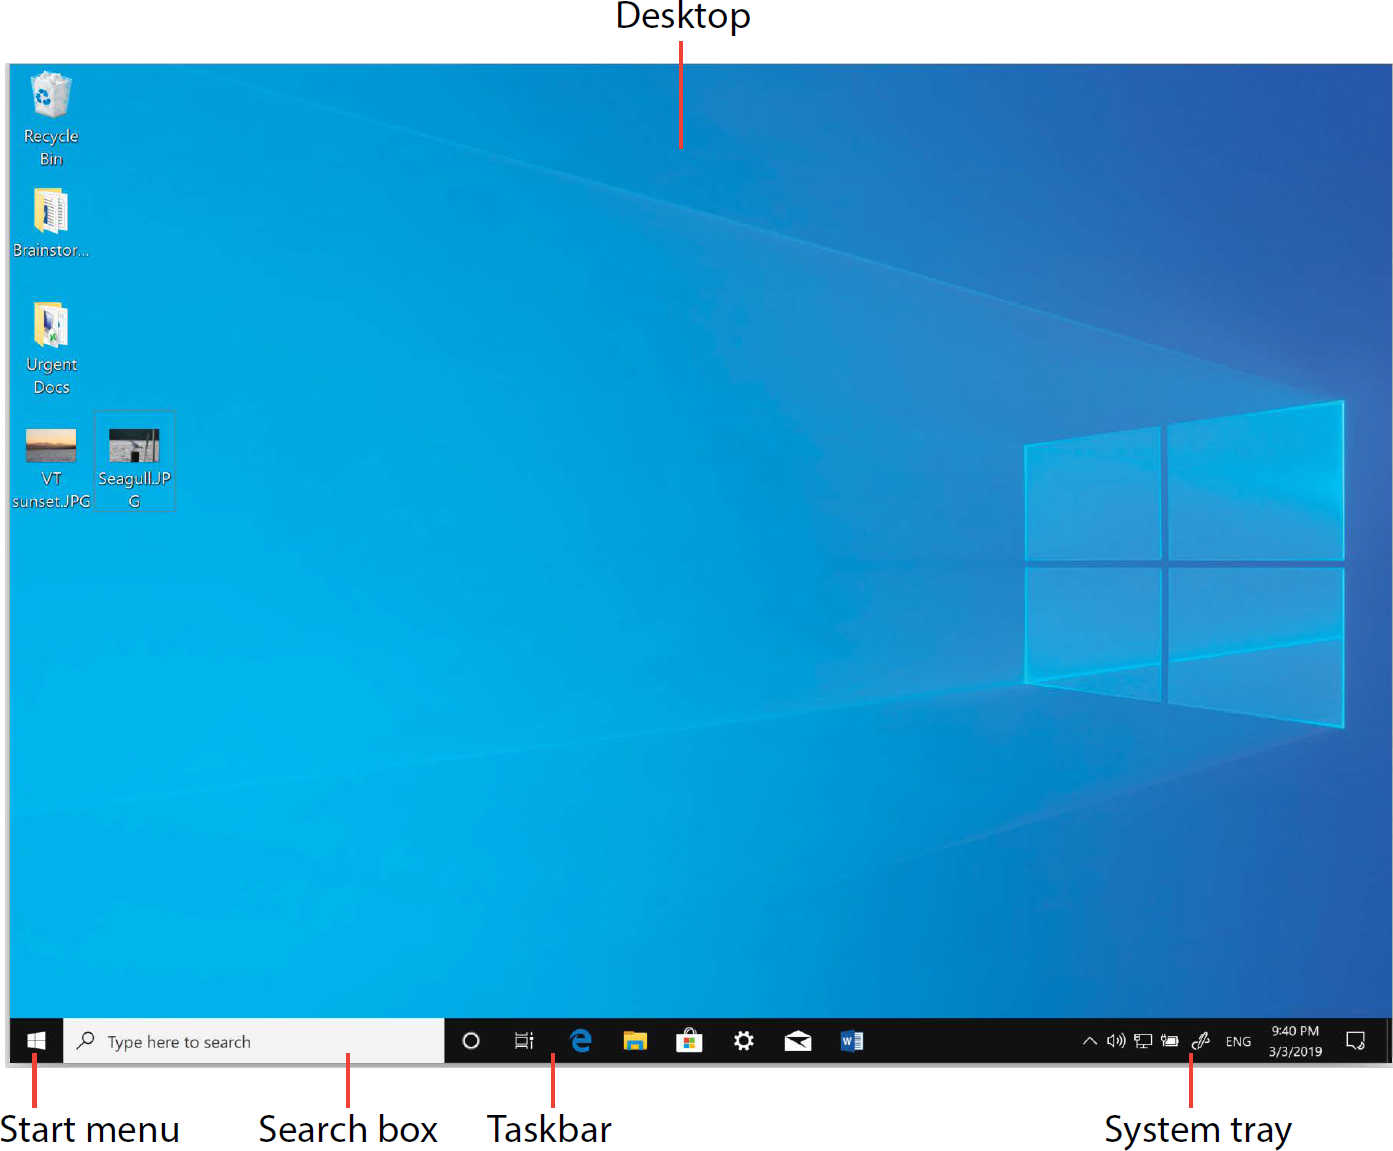 The desktop is your starting place, the first thing you see after you sign in. It has a shiny, clean look, as well as the time-honored landmarks—Start menu, taskbar, system tray—just where they’ve always been.